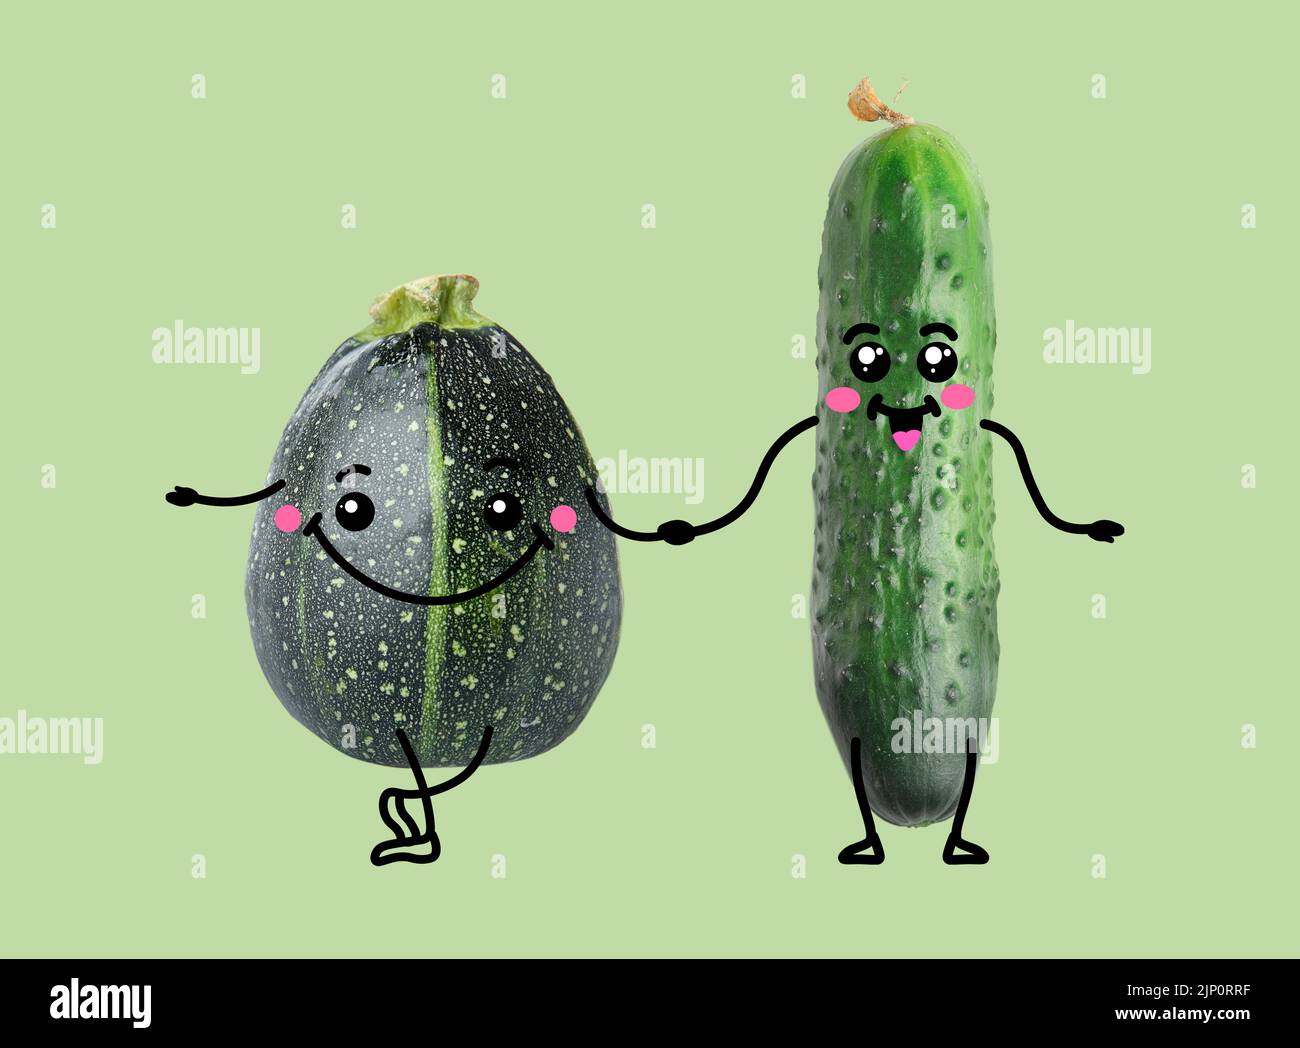 Funny cucumber and squash on green background Stock Photo